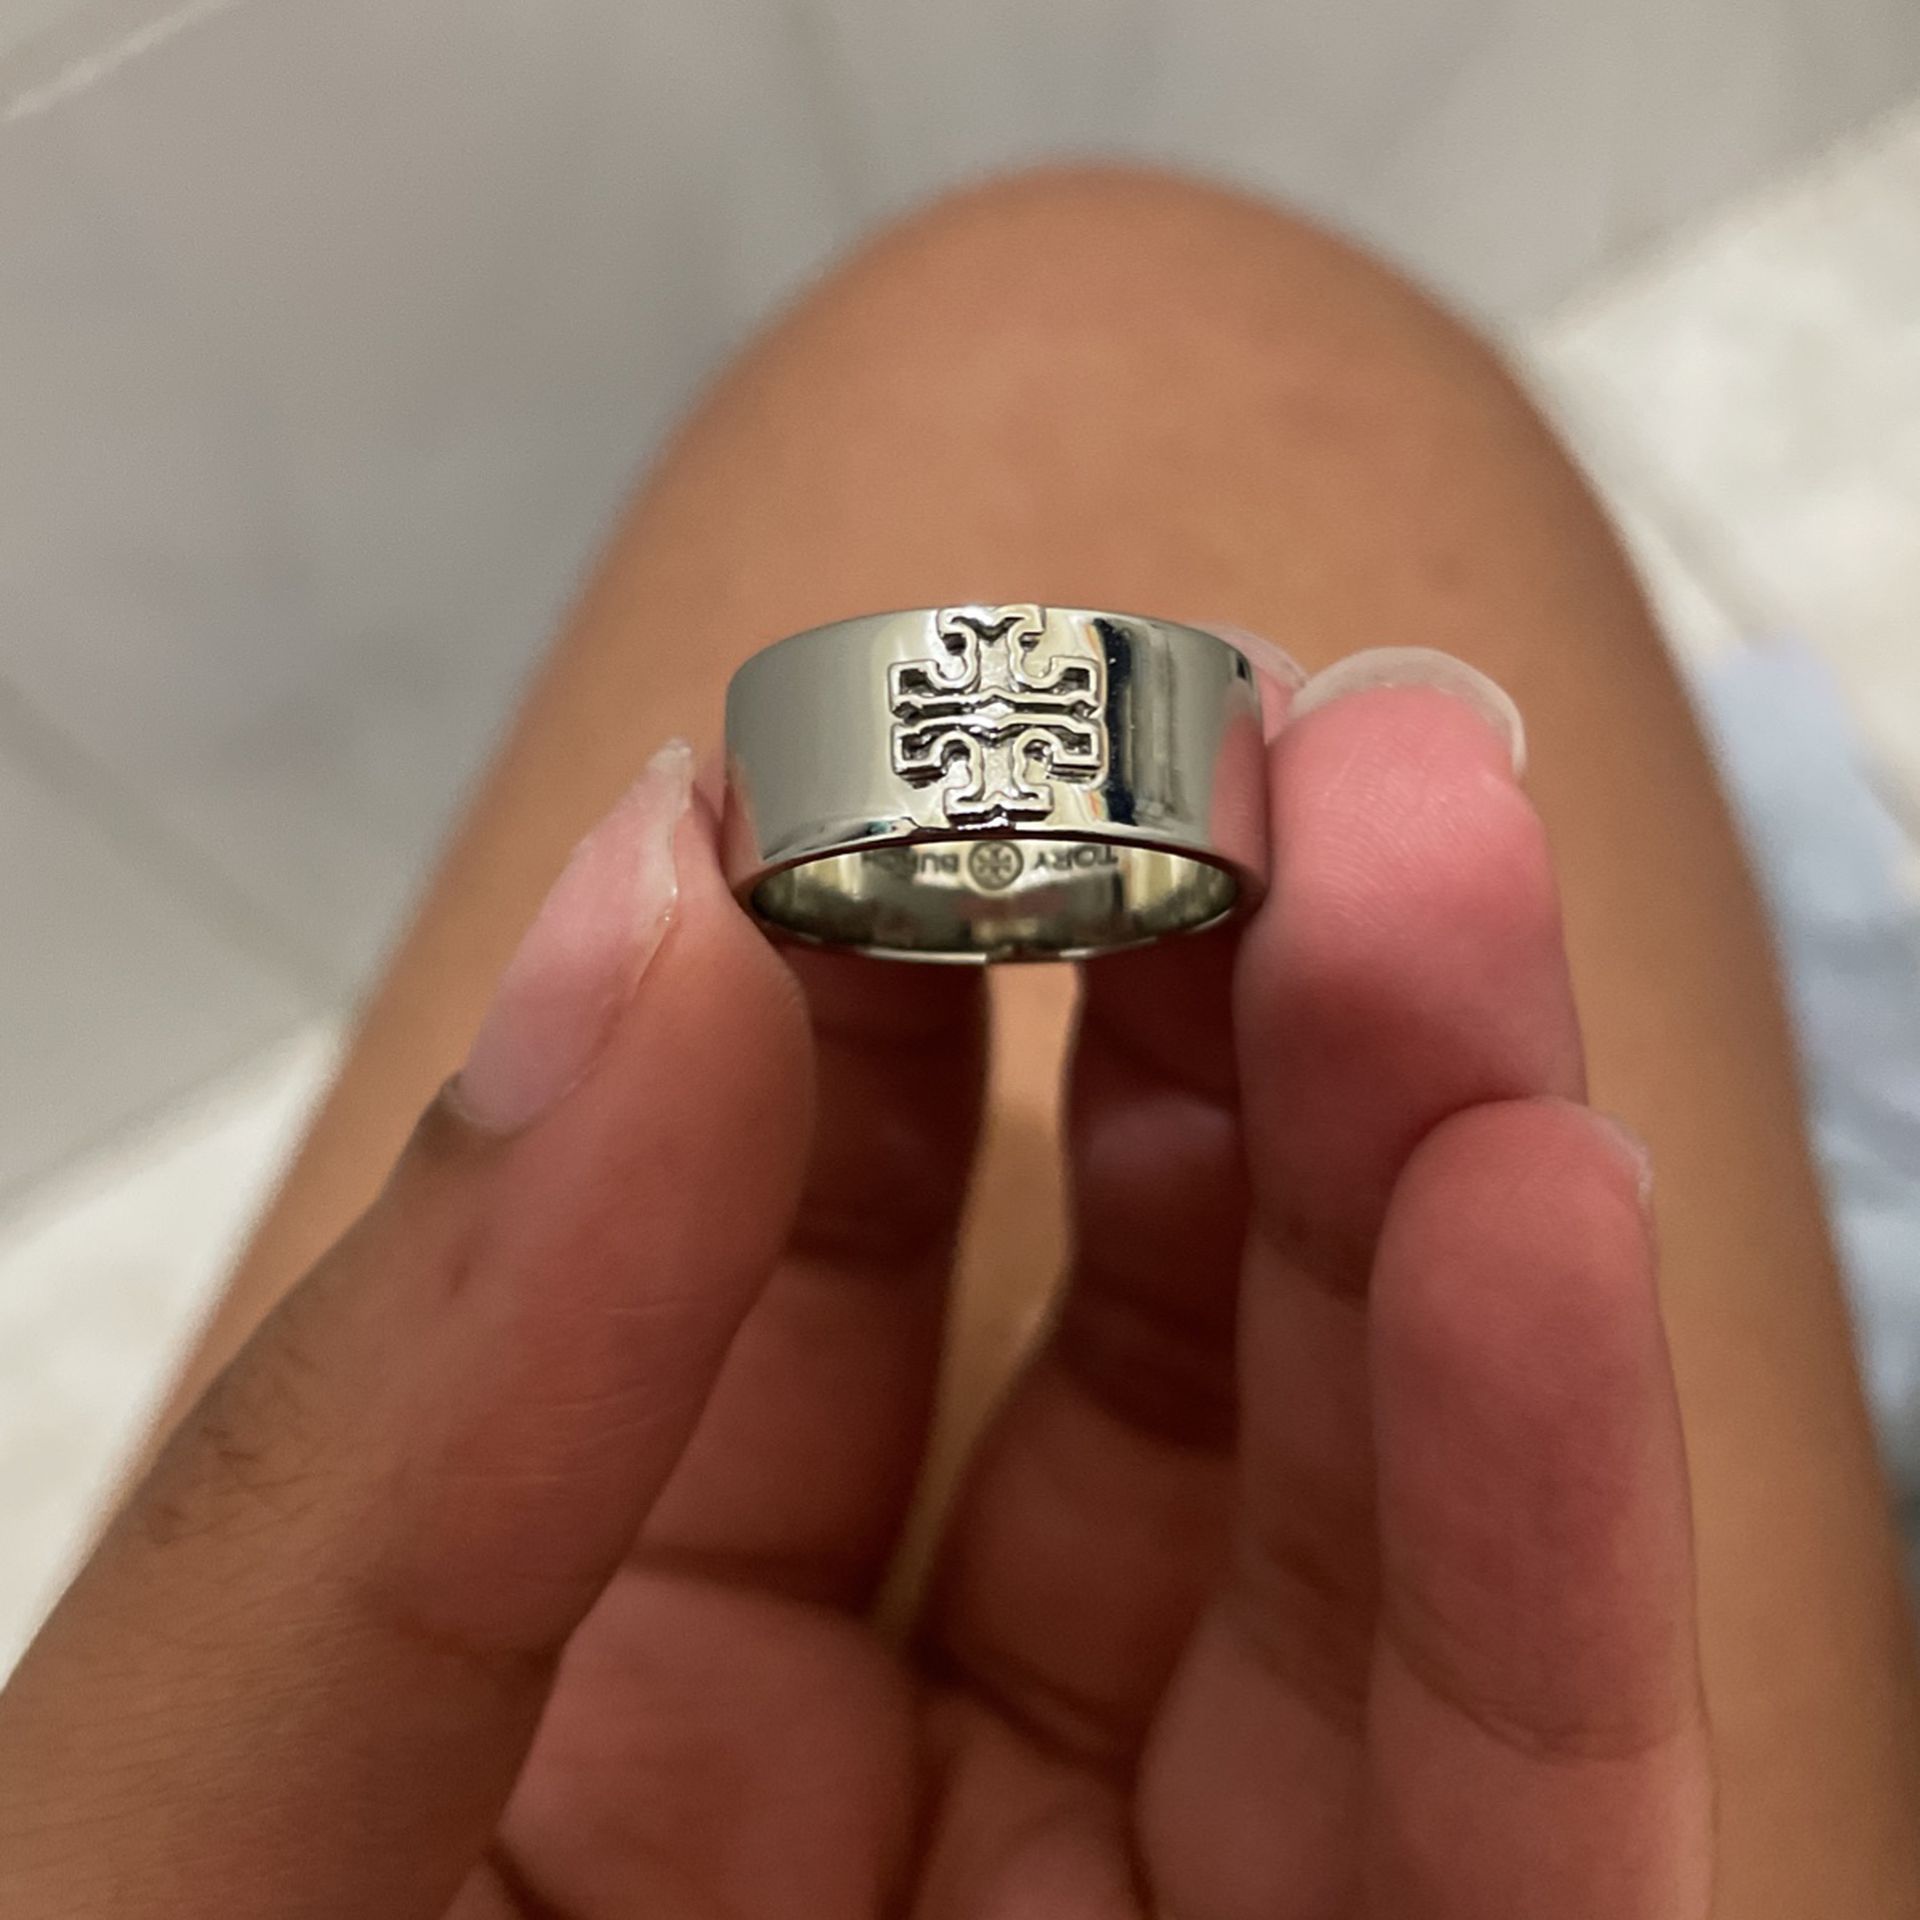 Tory Burch Ring for Sale in Queens, NY - OfferUp